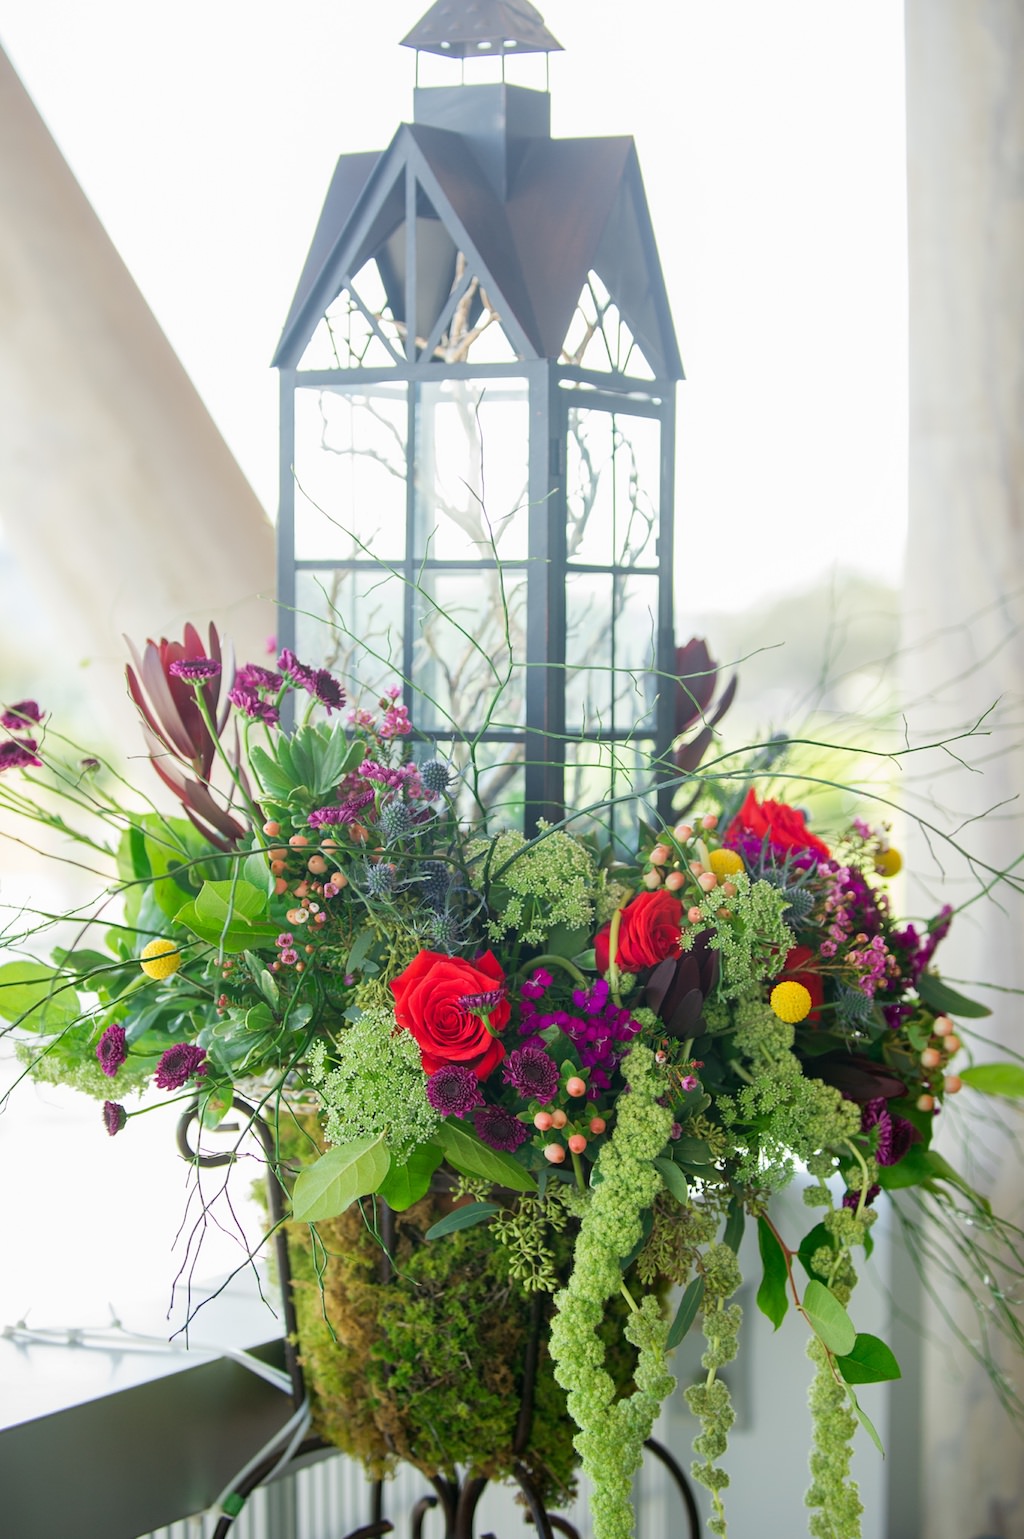 Romantic, Whimsical Tall Gray Lantern in Garden Ceremony Wedding Decor, Eclectic Colorful Mix Floral Wedding Flowers | | Tampa Bay Wedding Photographer Andi Diamond Photography | Tampa Bay Florist Apple Blossoms Floral Designs